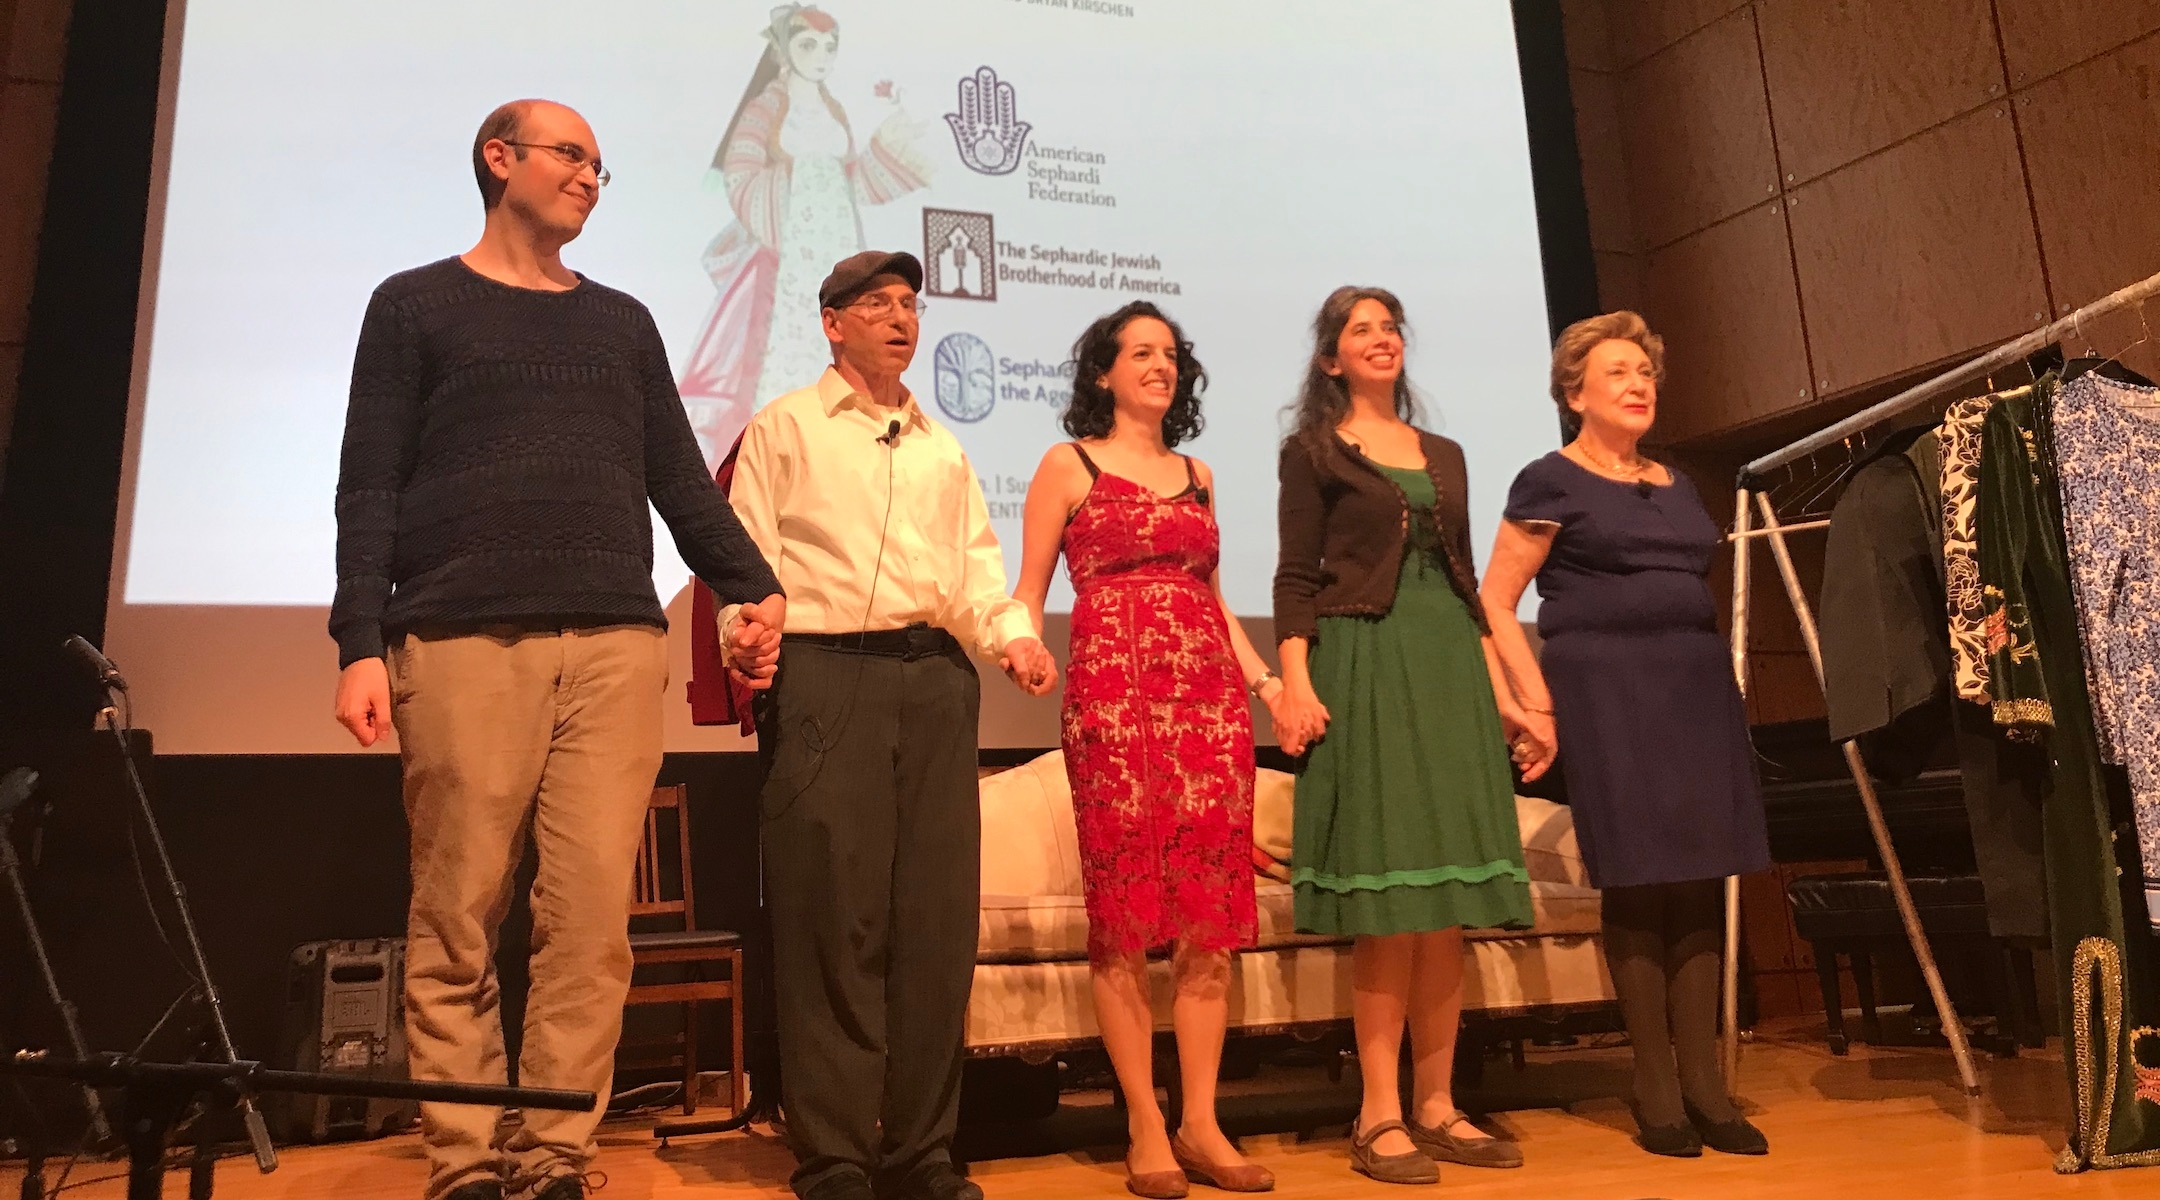 A New York celebration of Ladino aims to bust the myth that the Judeo-Spanish language is dead